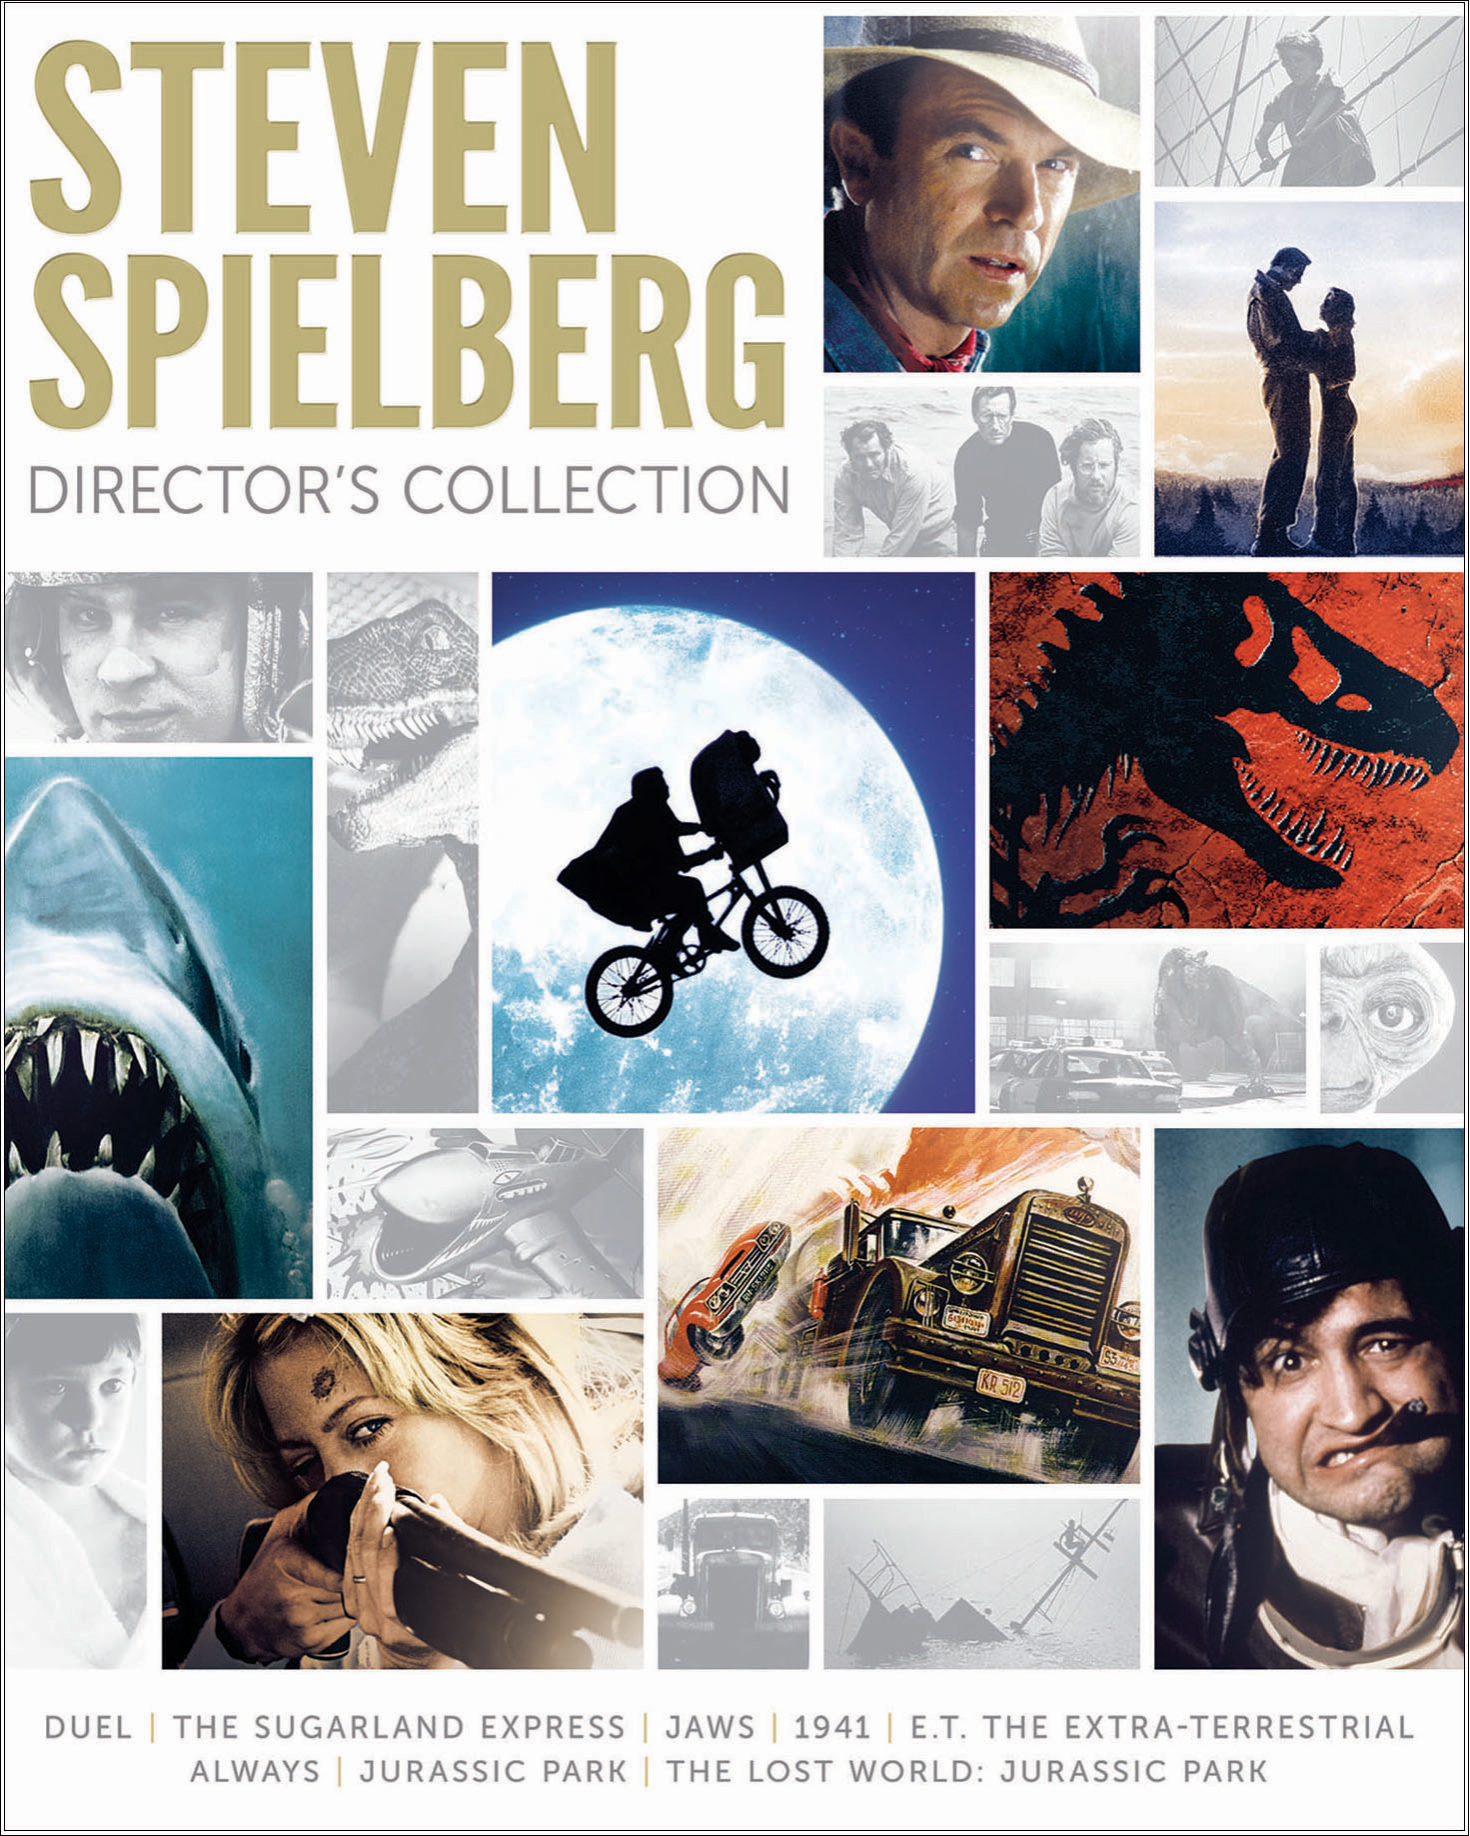 Steven Spielberg Director's Collection (Box Set) - Blu-ray [ ] - Modern Classic Movies on Blu-ray